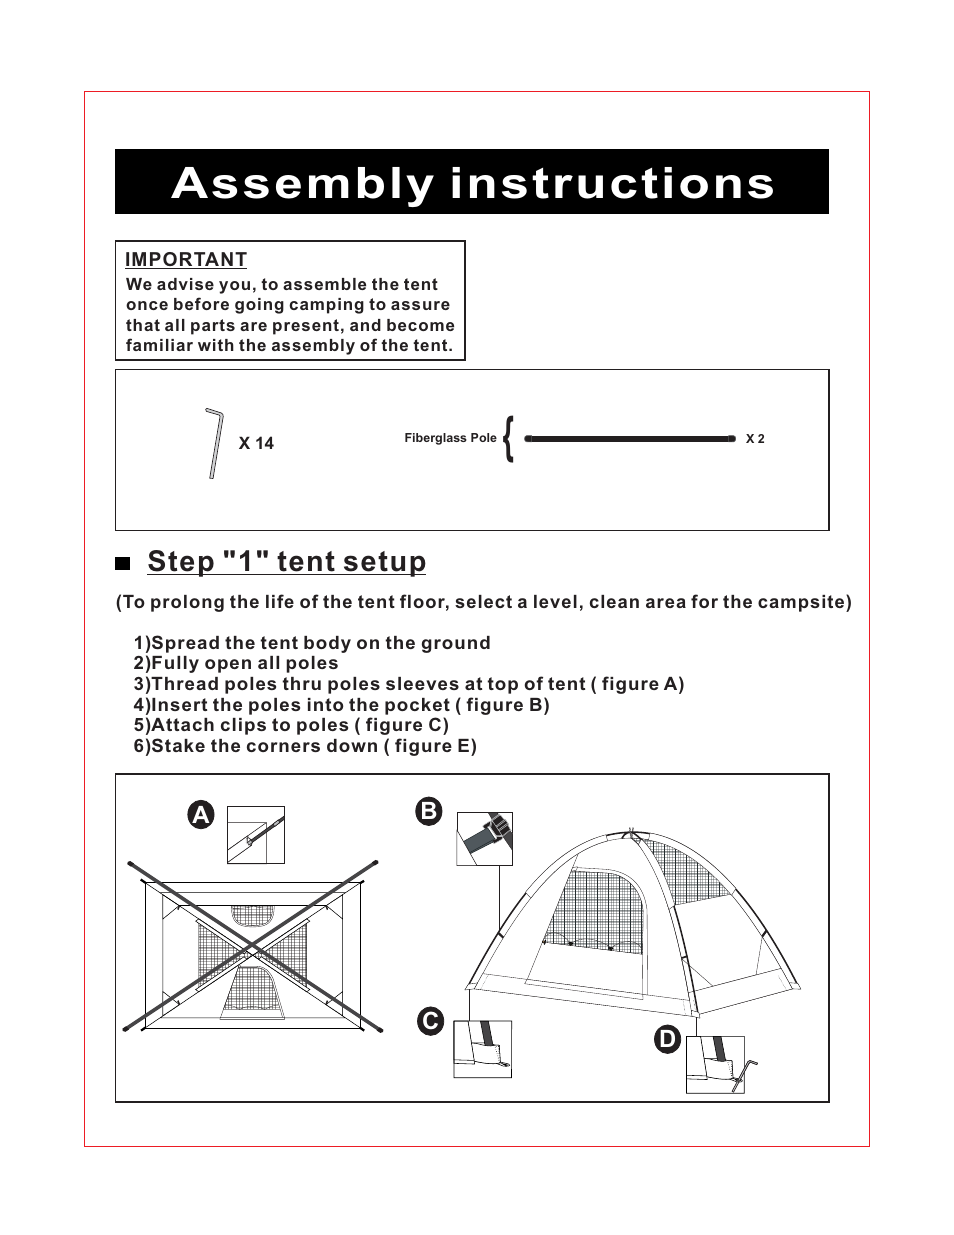 Assembly instructions, Step "1" tent setup | Giga Tent BT 014 User Manual | Page 2 / 8